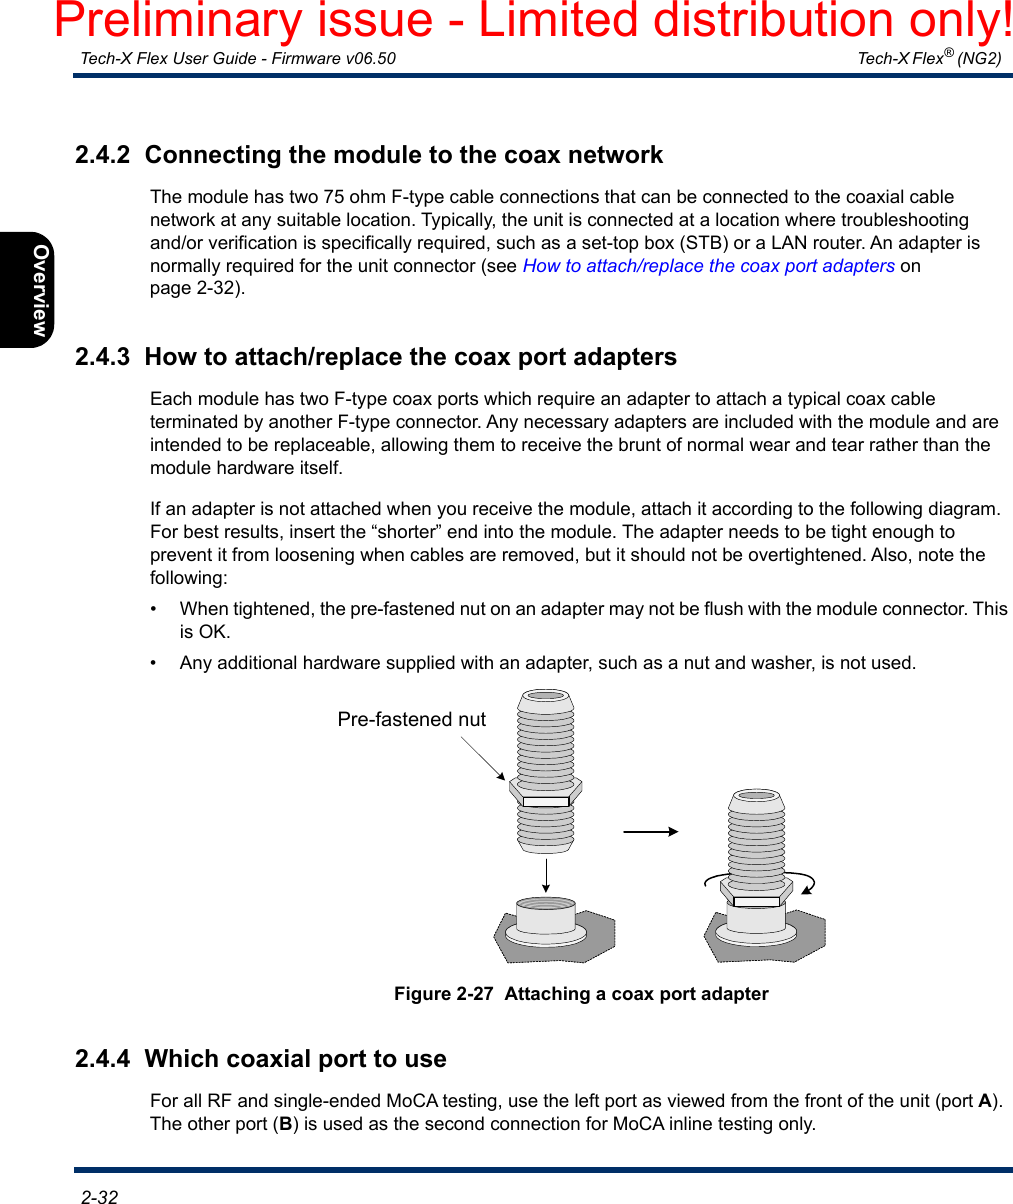  Tech-X Flex User Guide - Firmware v06.50   Tech-X Flex® (NG2)  2-32Intro Overview Wi-Fi Ethernet System IP/Video MoCA RF Specs2.4.2  Connecting the module to the coax networkThe module has two 75 ohm F-type cable connections that can be connected to the coaxial cable network at any suitable location. Typically, the unit is connected at a location where troubleshooting and/or verification is specifically required, such as a set-top box (STB) or a LAN router. An adapter is normally required for the unit connector (see How to attach/replace the coax port adapters on page 2-32).2.4.3  How to attach/replace the coax port adaptersEach module has two F-type coax ports which require an adapter to attach a typical coax cable terminated by another F-type connector. Any necessary adapters are included with the module and are intended to be replaceable, allowing them to receive the brunt of normal wear and tear rather than the module hardware itself.If an adapter is not attached when you receive the module, attach it according to the following diagram. For best results, insert the “shorter” end into the module. The adapter needs to be tight enough to prevent it from loosening when cables are removed, but it should not be overtightened. Also, note the following:• When tightened, the pre-fastened nut on an adapter may not be flush with the module connector. This is OK.• Any additional hardware supplied with an adapter, such as a nut and washer, is not used.Figure 2-27  Attaching a coax port adapter2.4.4  Which coaxial port to useFor all RF and single-ended MoCA testing, use the left port as viewed from the front of the unit (port A). The other port (B) is used as the second connection for MoCA inline testing only.Pre-fastened nutPreliminary issue - Limited distribution only!